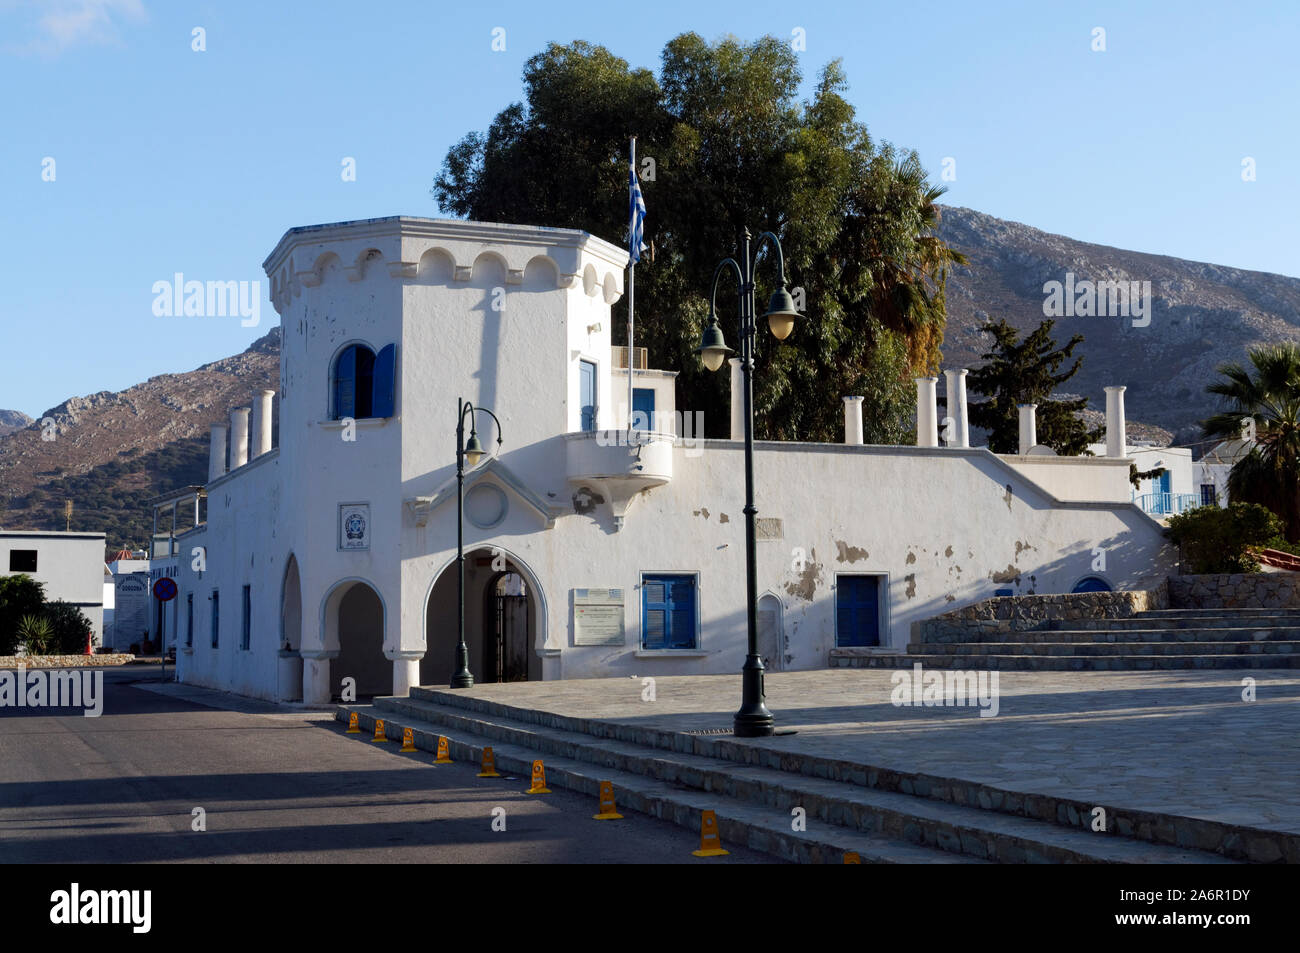 Police Station, built by the Italians during the occupation in the razionalismo style, Tilos, Dodecanese islands, Southern Aegean, Greece. Stock Photo